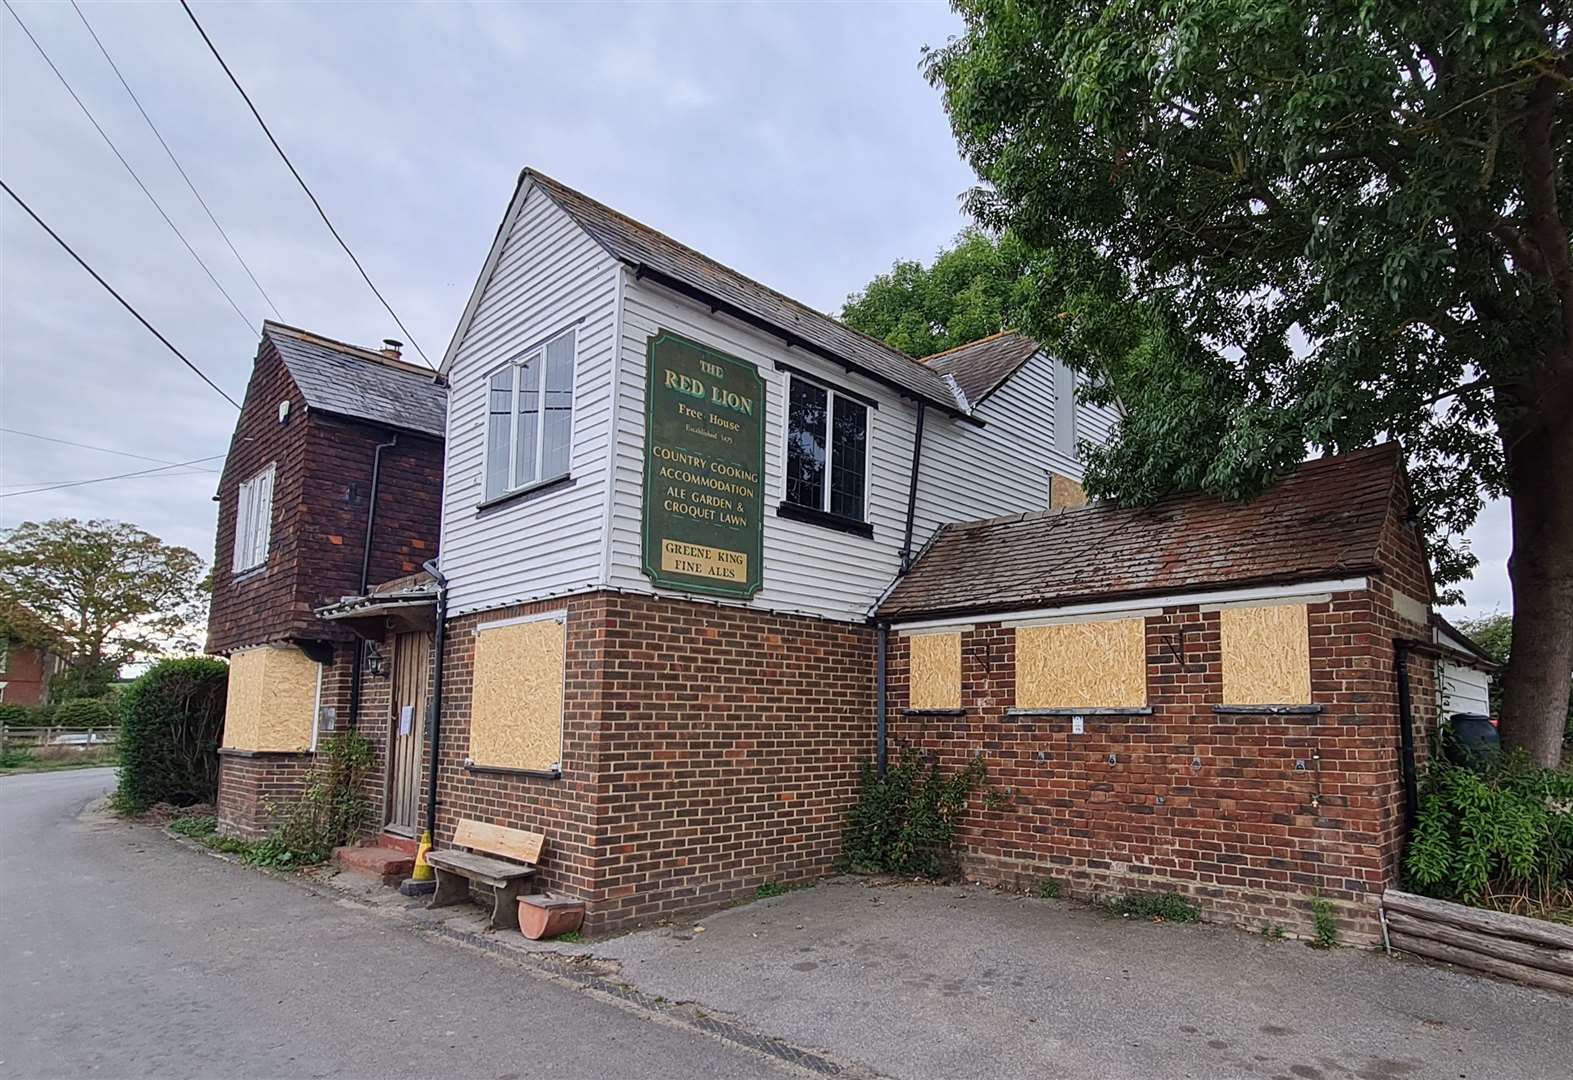 The Red Lion at Stodmarsh is now boarded up